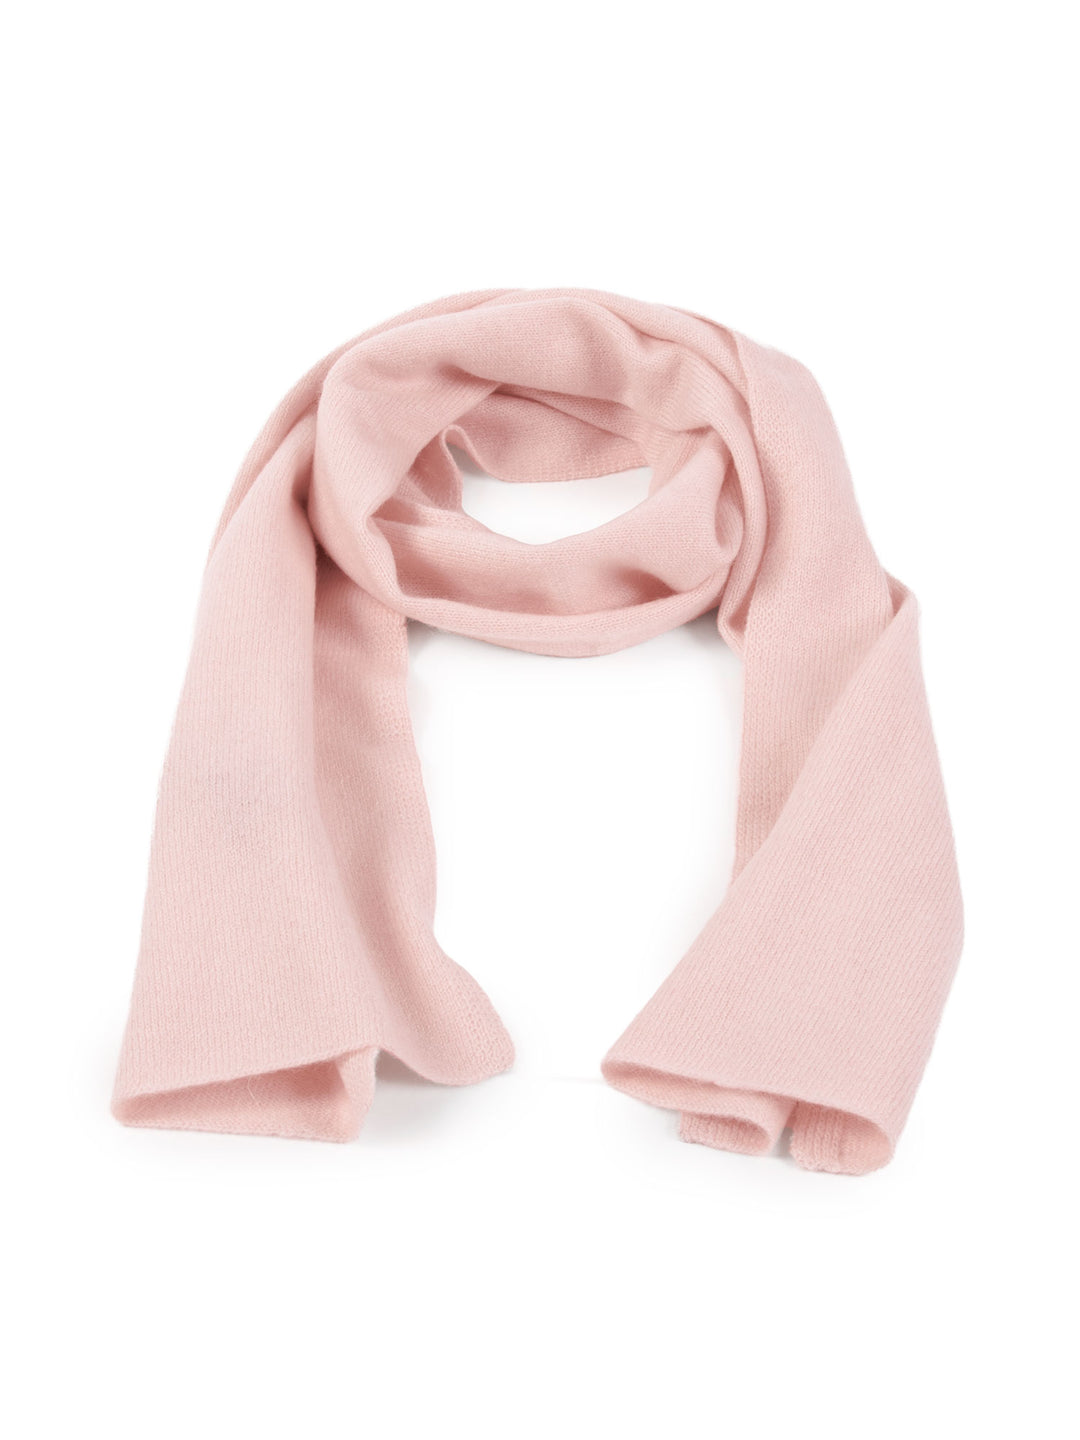 children scarf in 100% pure cashmere, soft, non itching, natural.